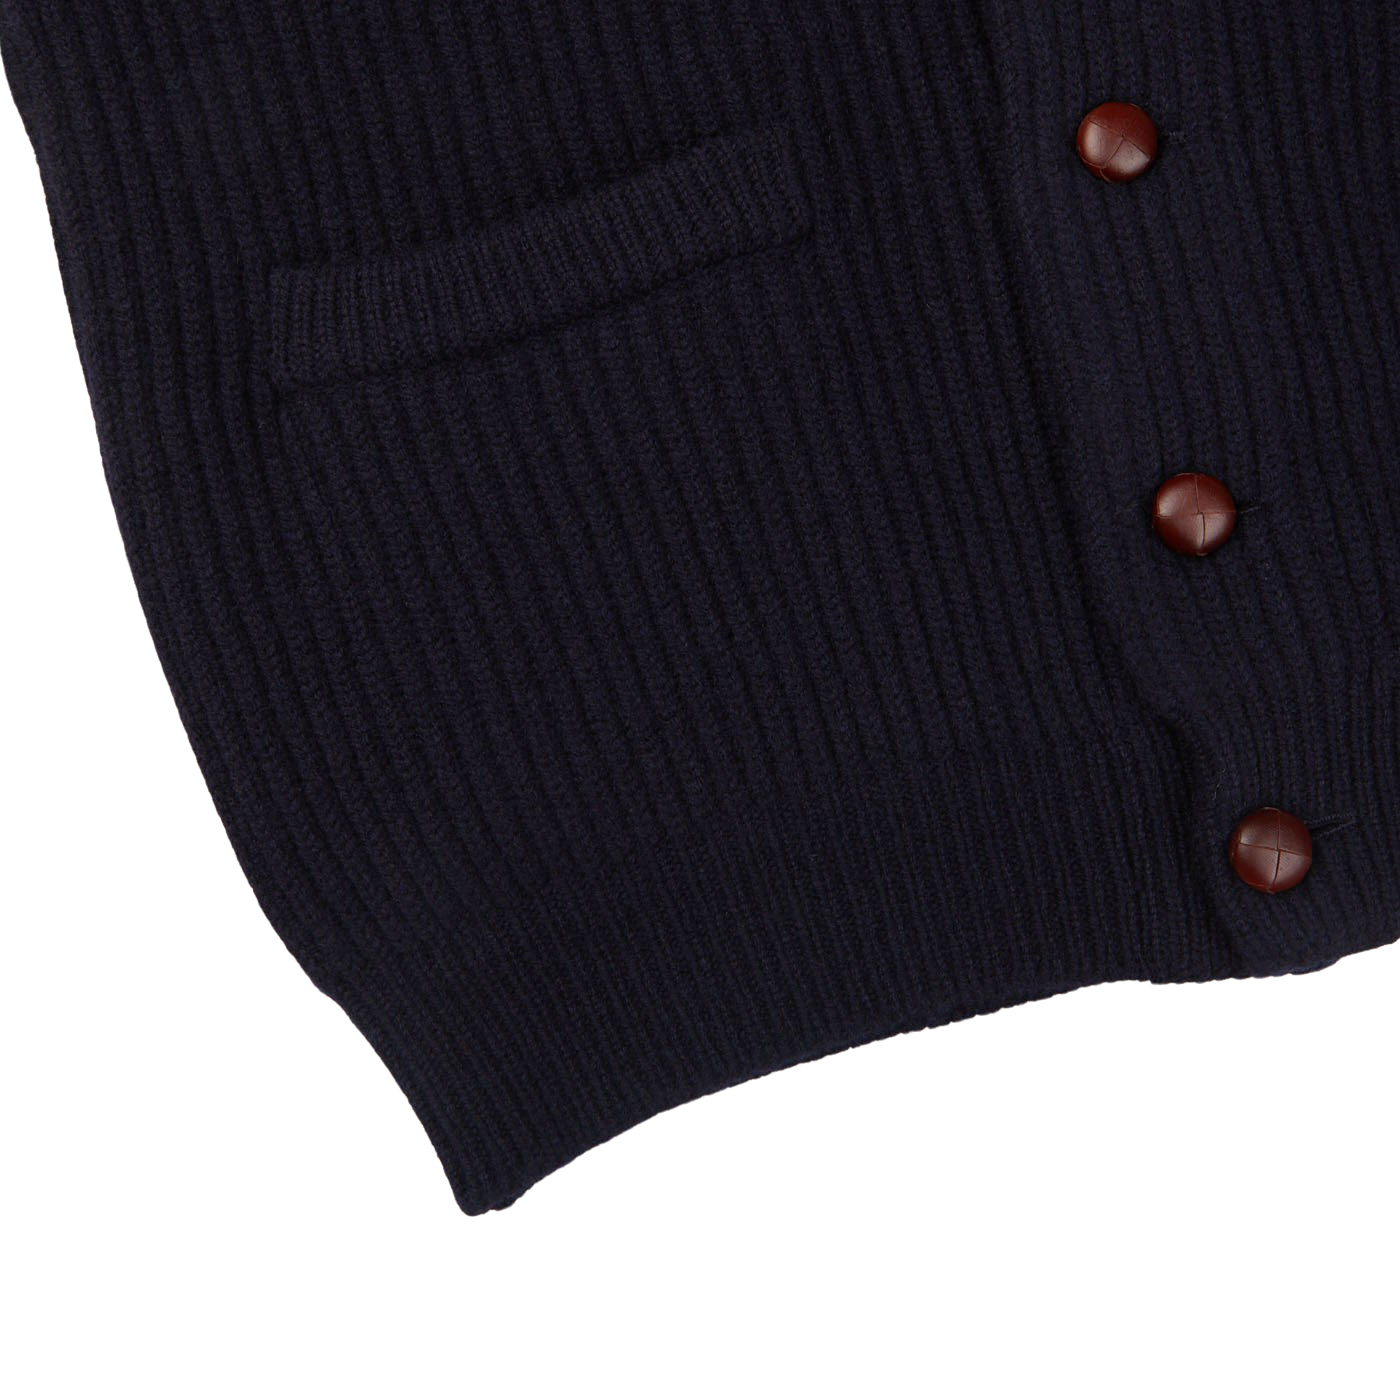 A William Lockie navy lambswool shawl collar cardigan with leather buttons.